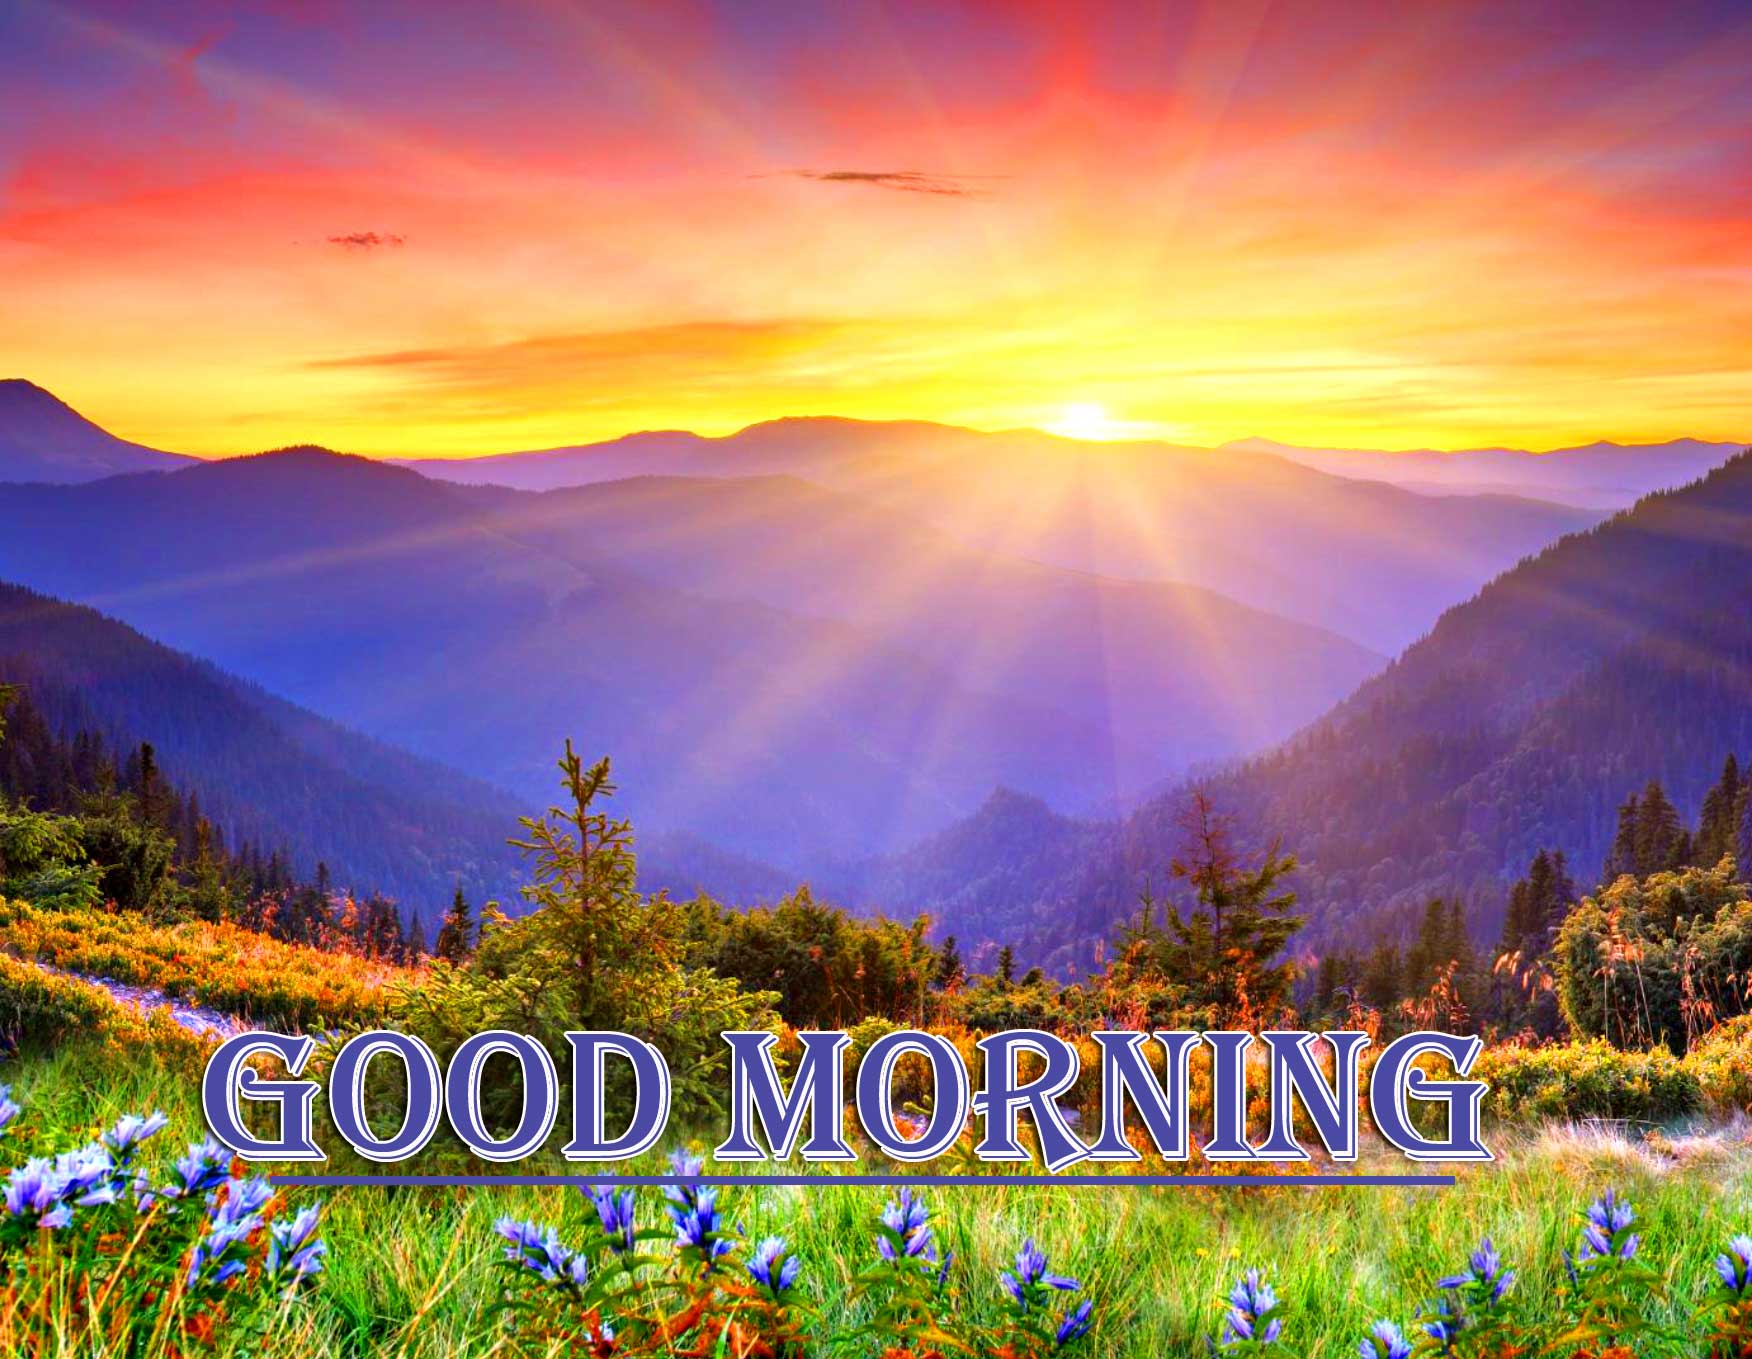 Beautiful Free Good Morning Wishes With Sunrise Pics Wallpaper Download 